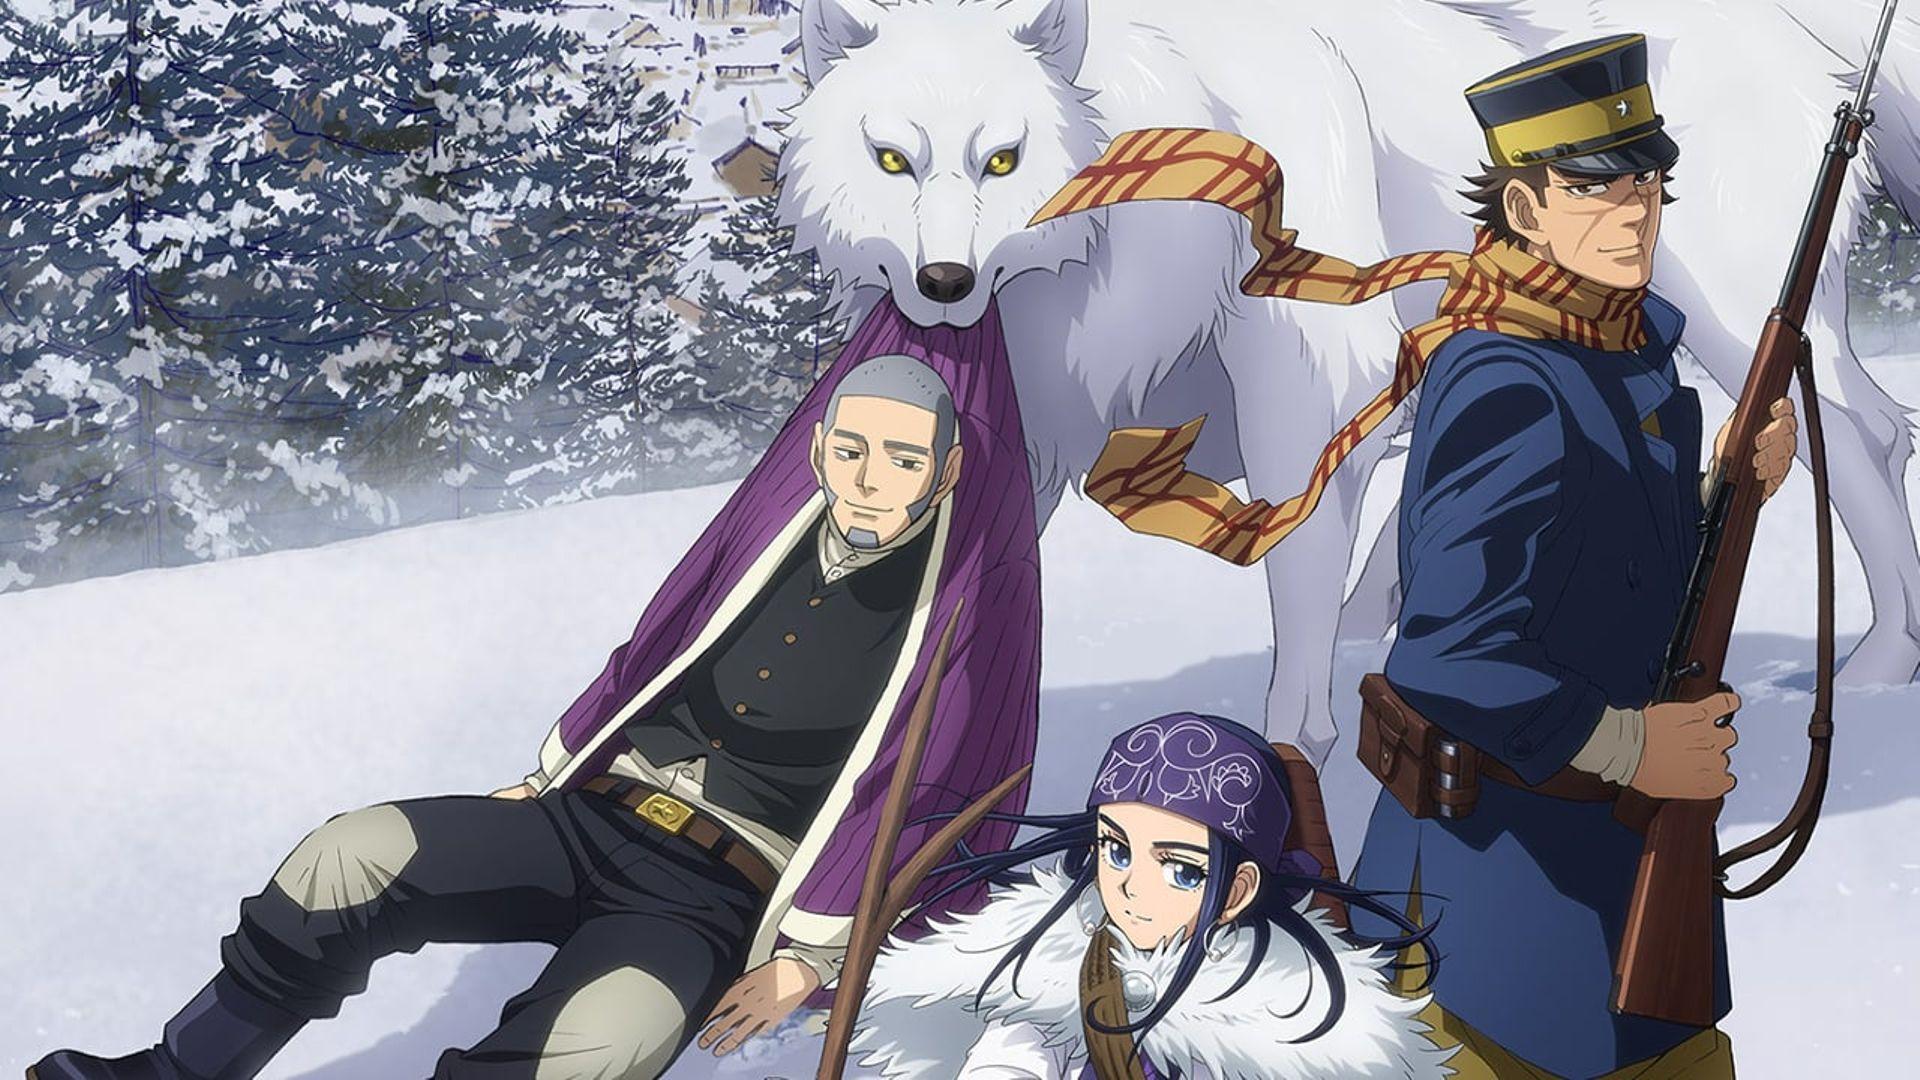 14 Golden Kamuy Wallpapers for iPhone and Android by Tyler Henry